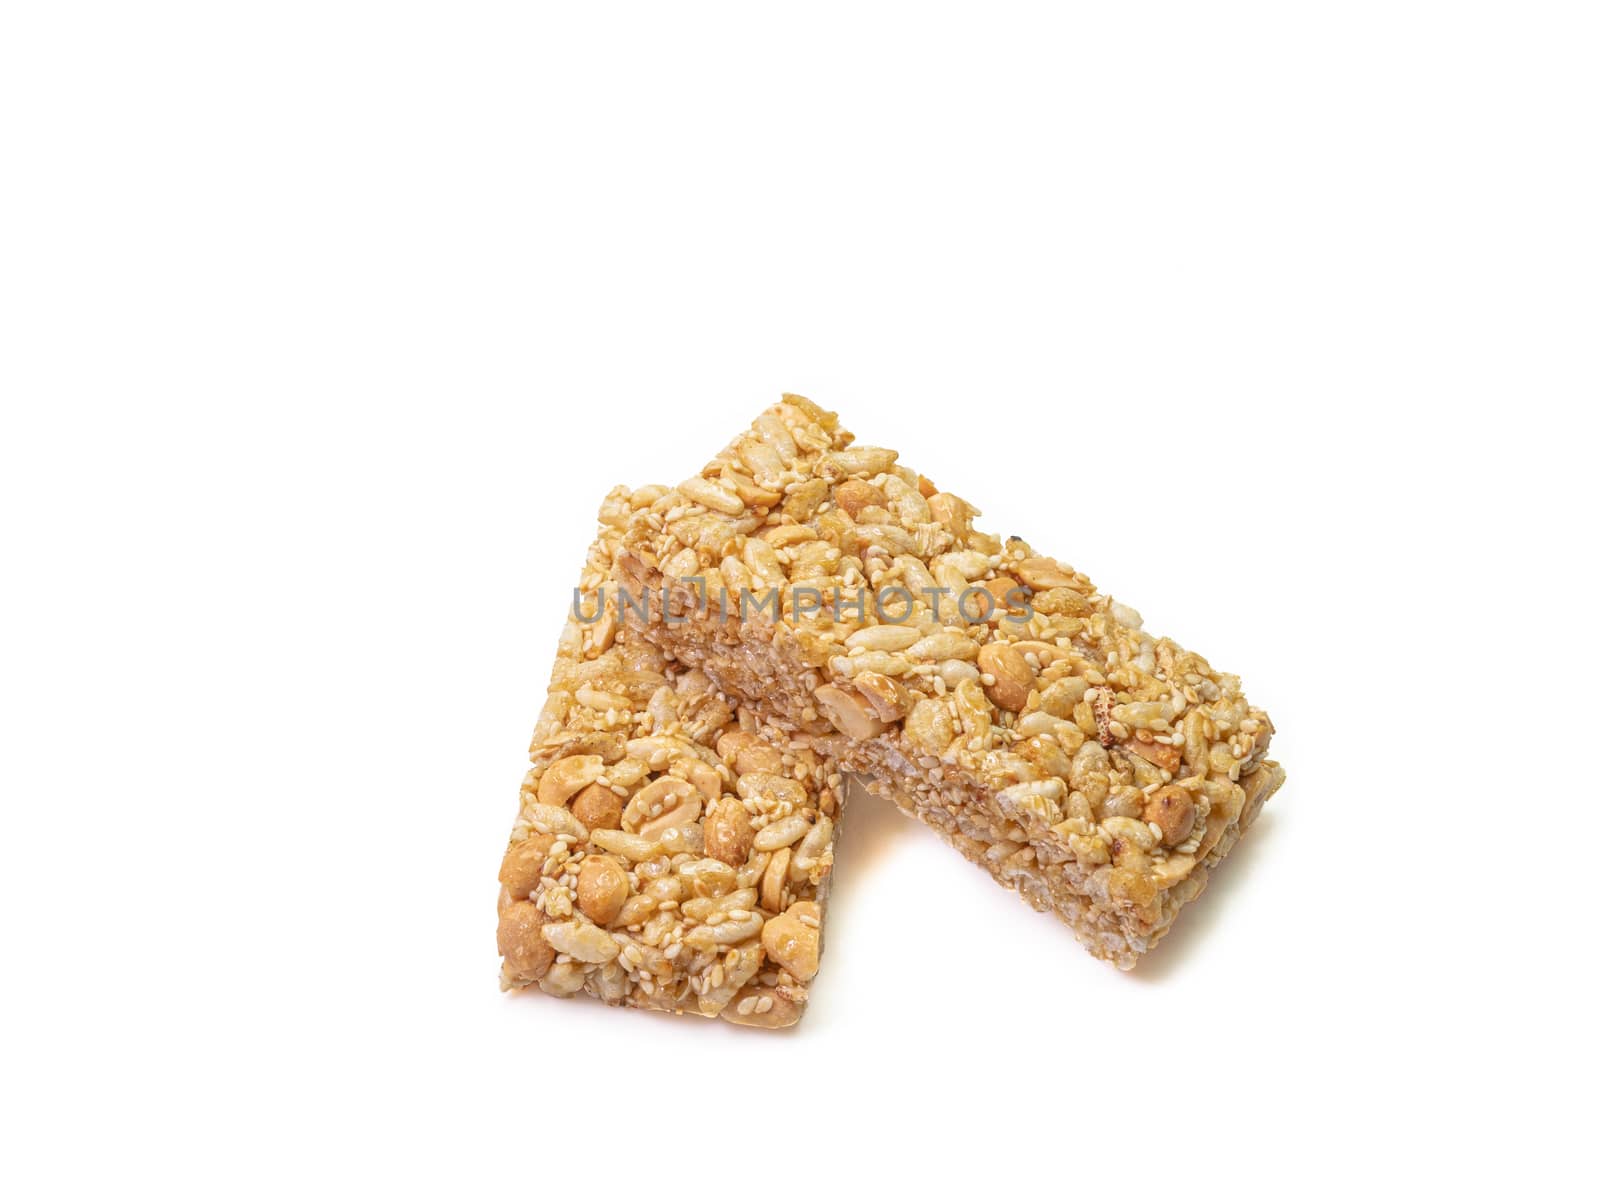 The close up of homemade Thai sweet cereal bar candy on white background, traditional muesli food in thailand.